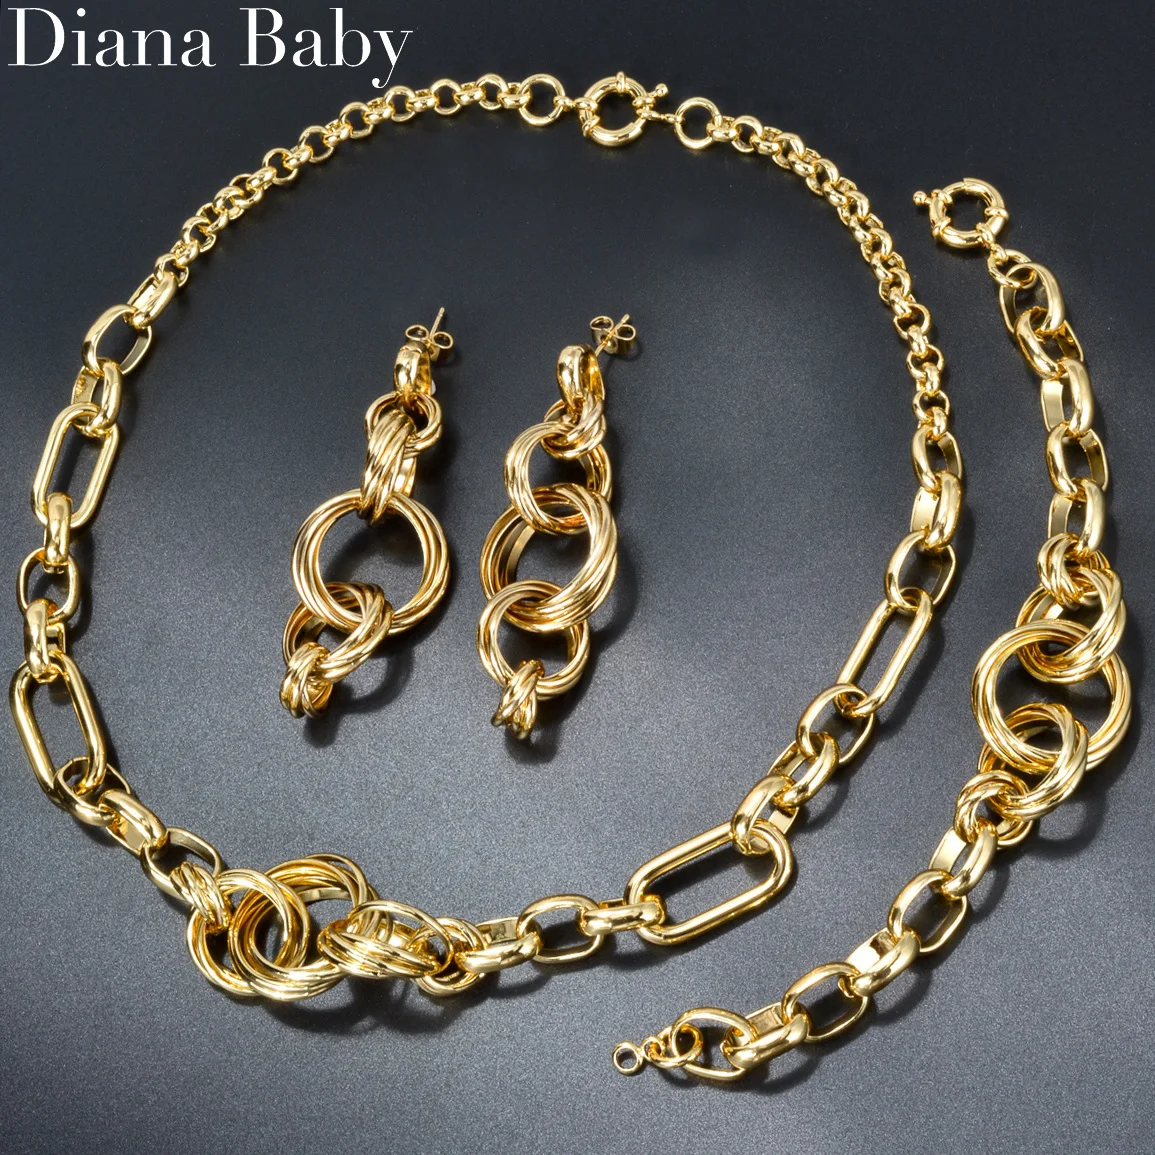 

Vintage Chunky Link Chain Necklace Earrings Bracelet Jewelry Set Italian 18K Gold Color Geometry Hiphop Punk Jewelry Accessories